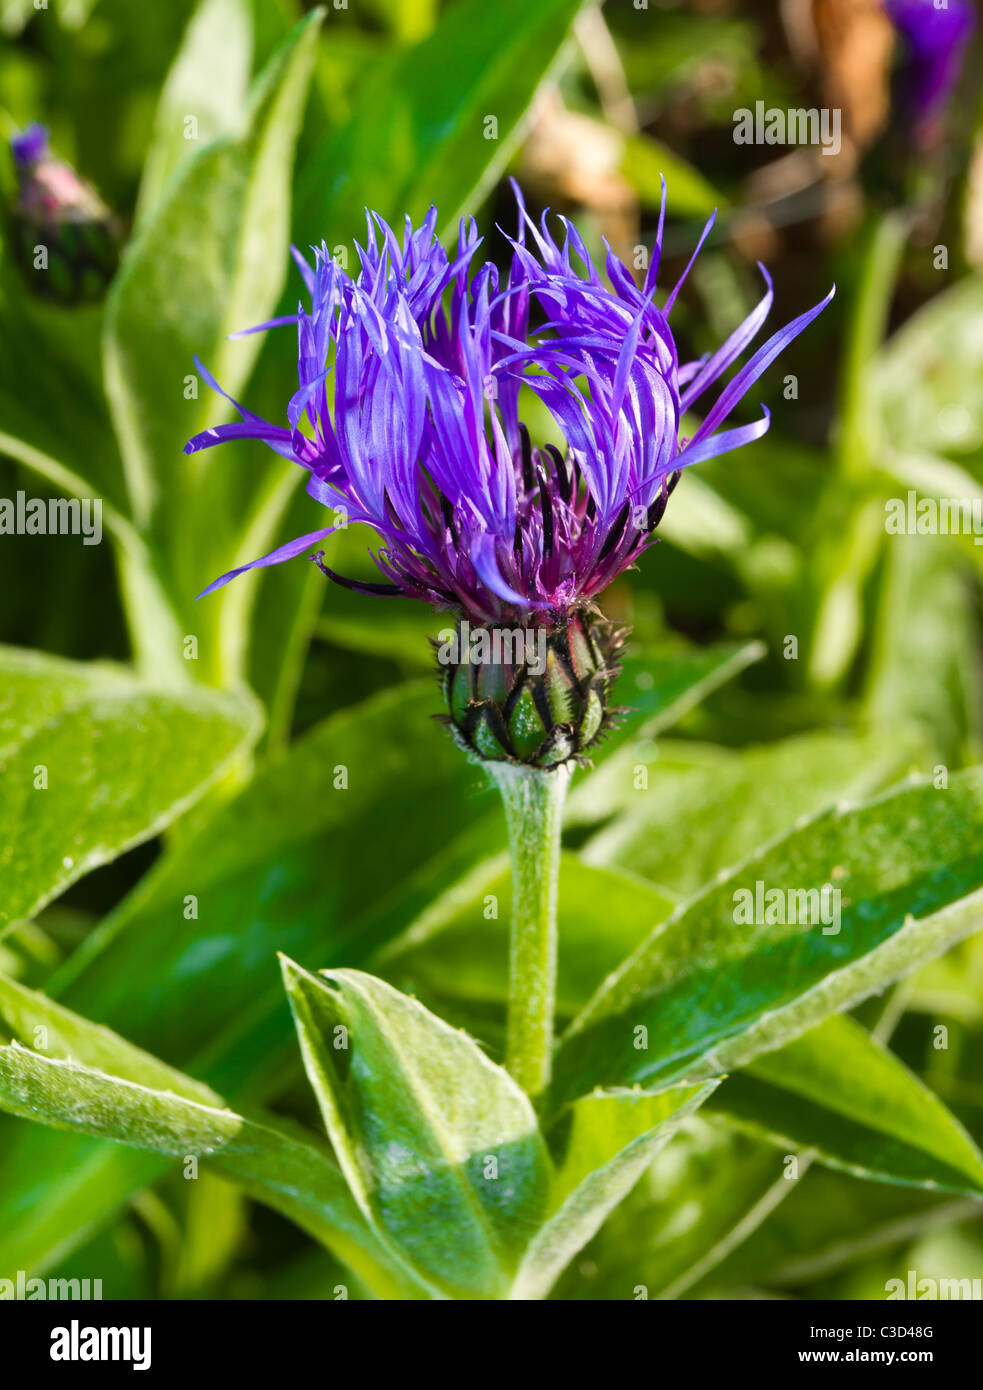 Vibrant blue and purple cornflower just starting to open in morning sun. Stock Photo